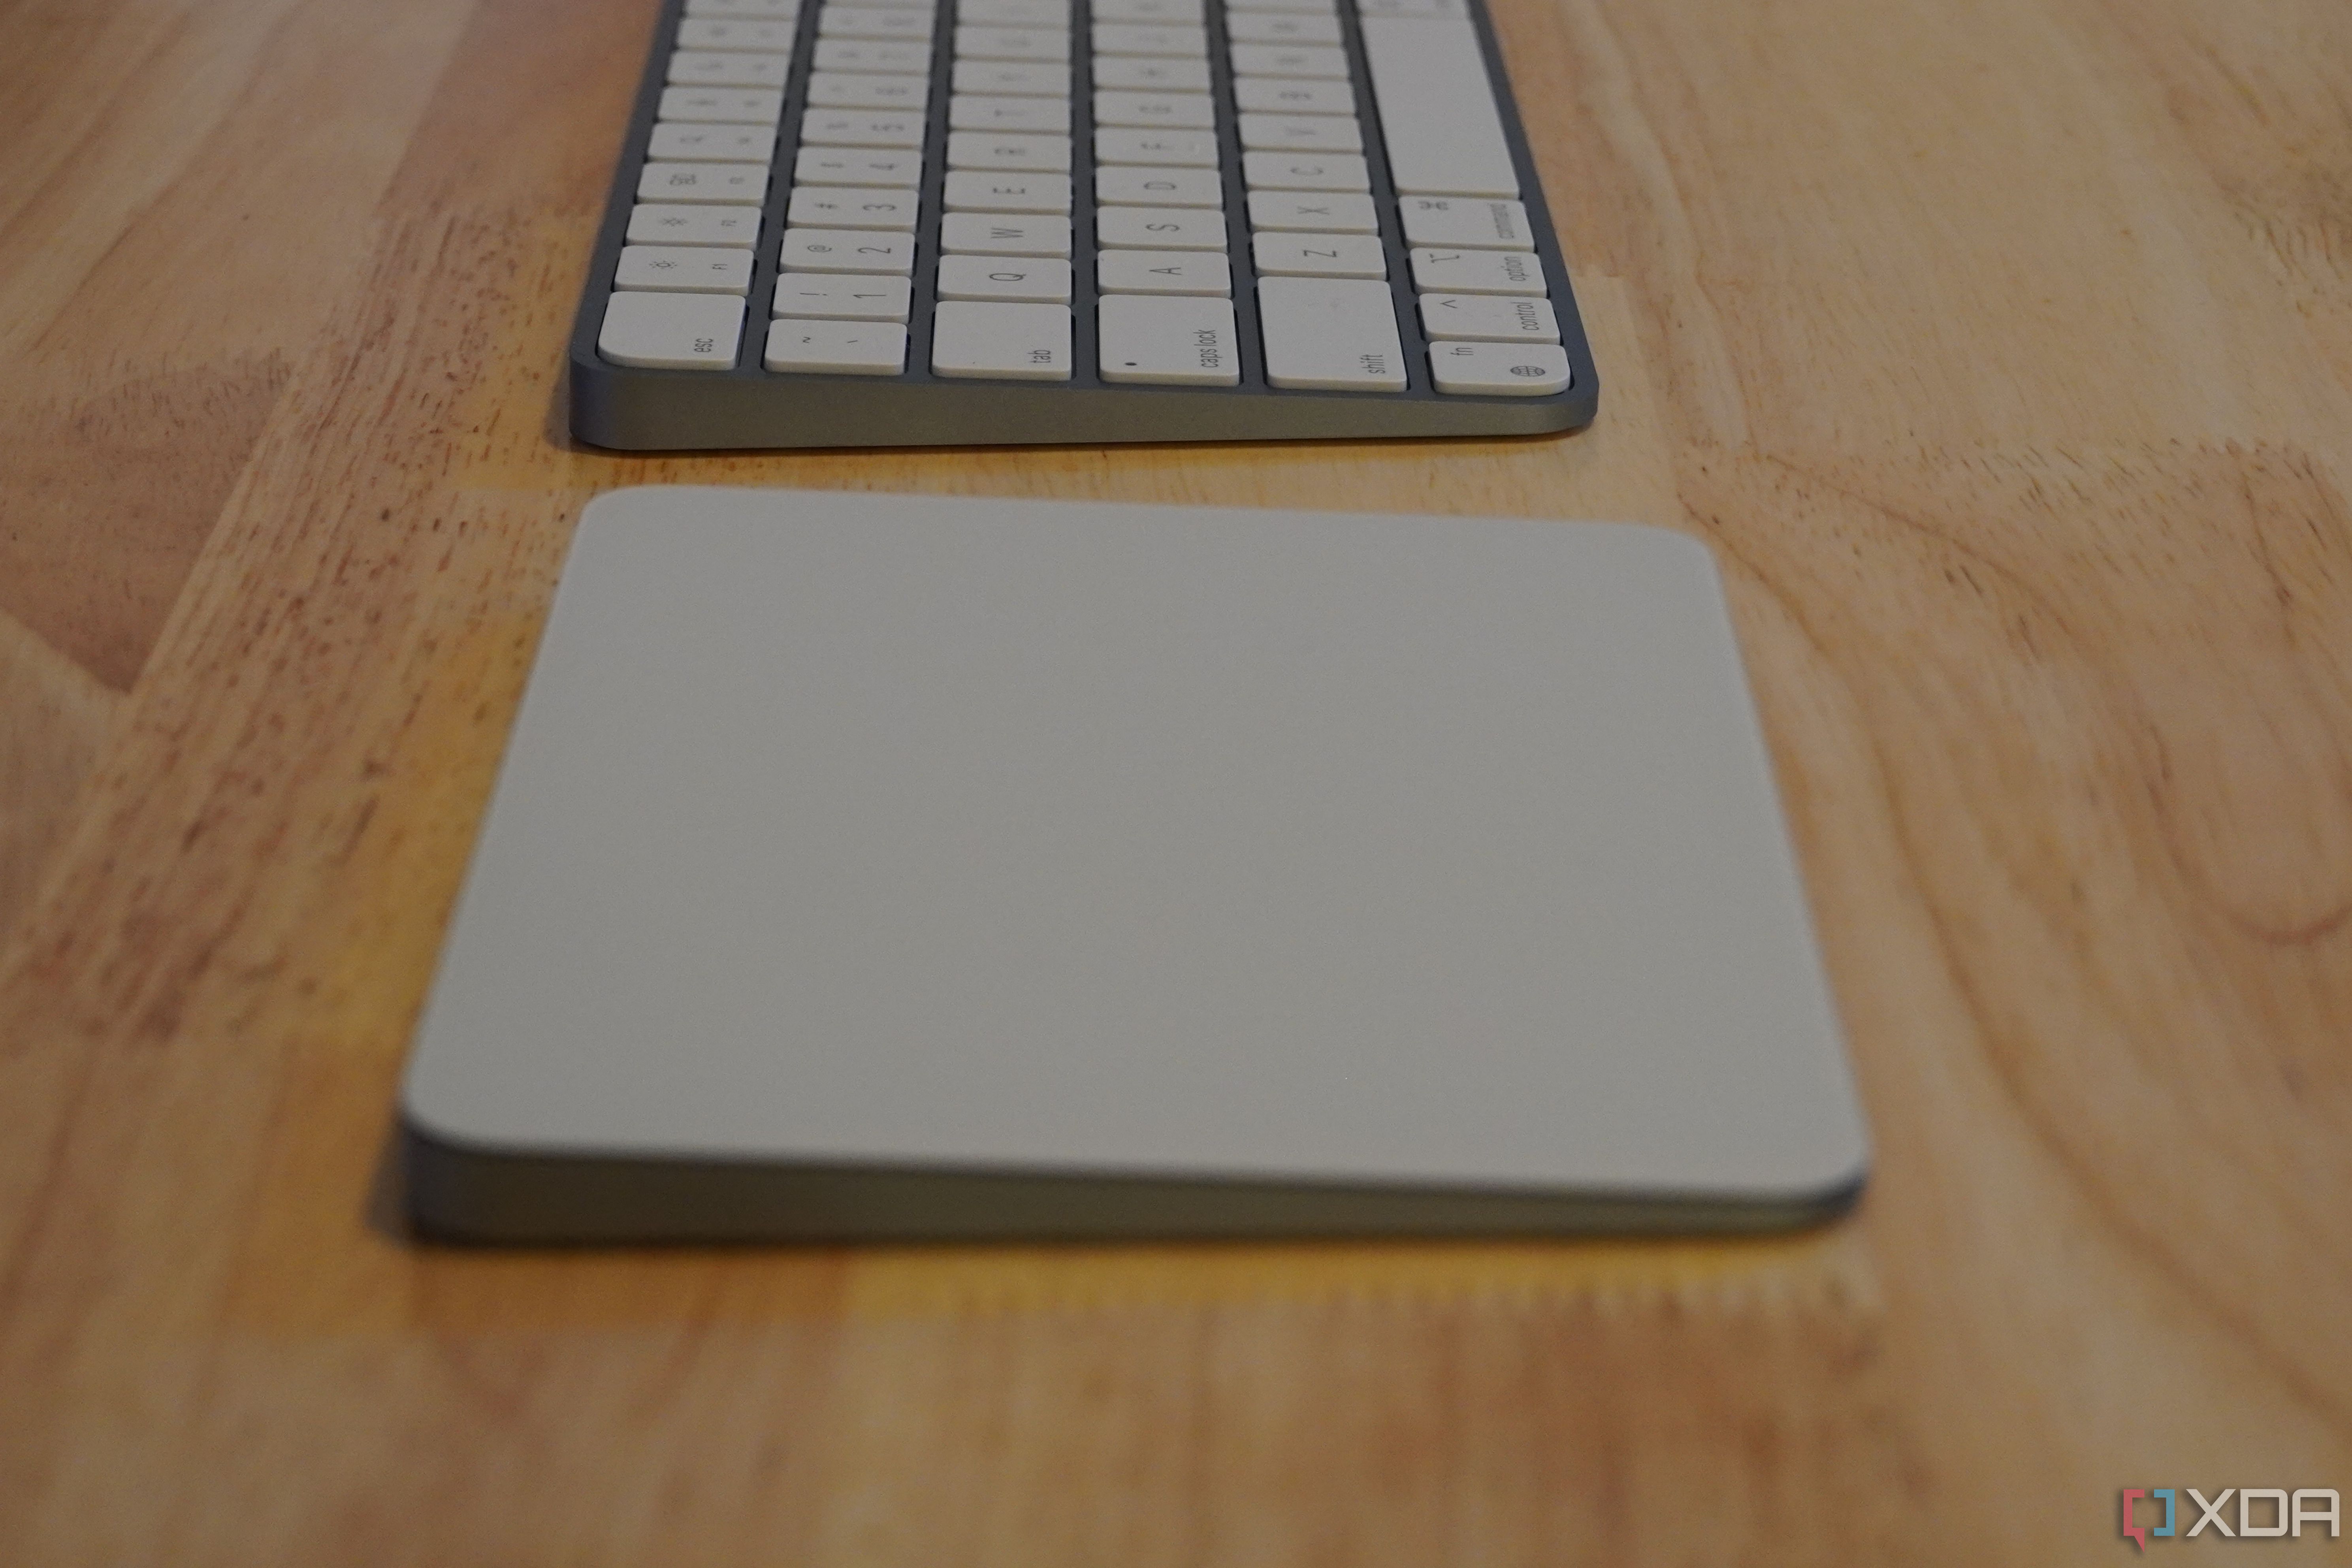 The side of a trackpad and keyboard on a desk.